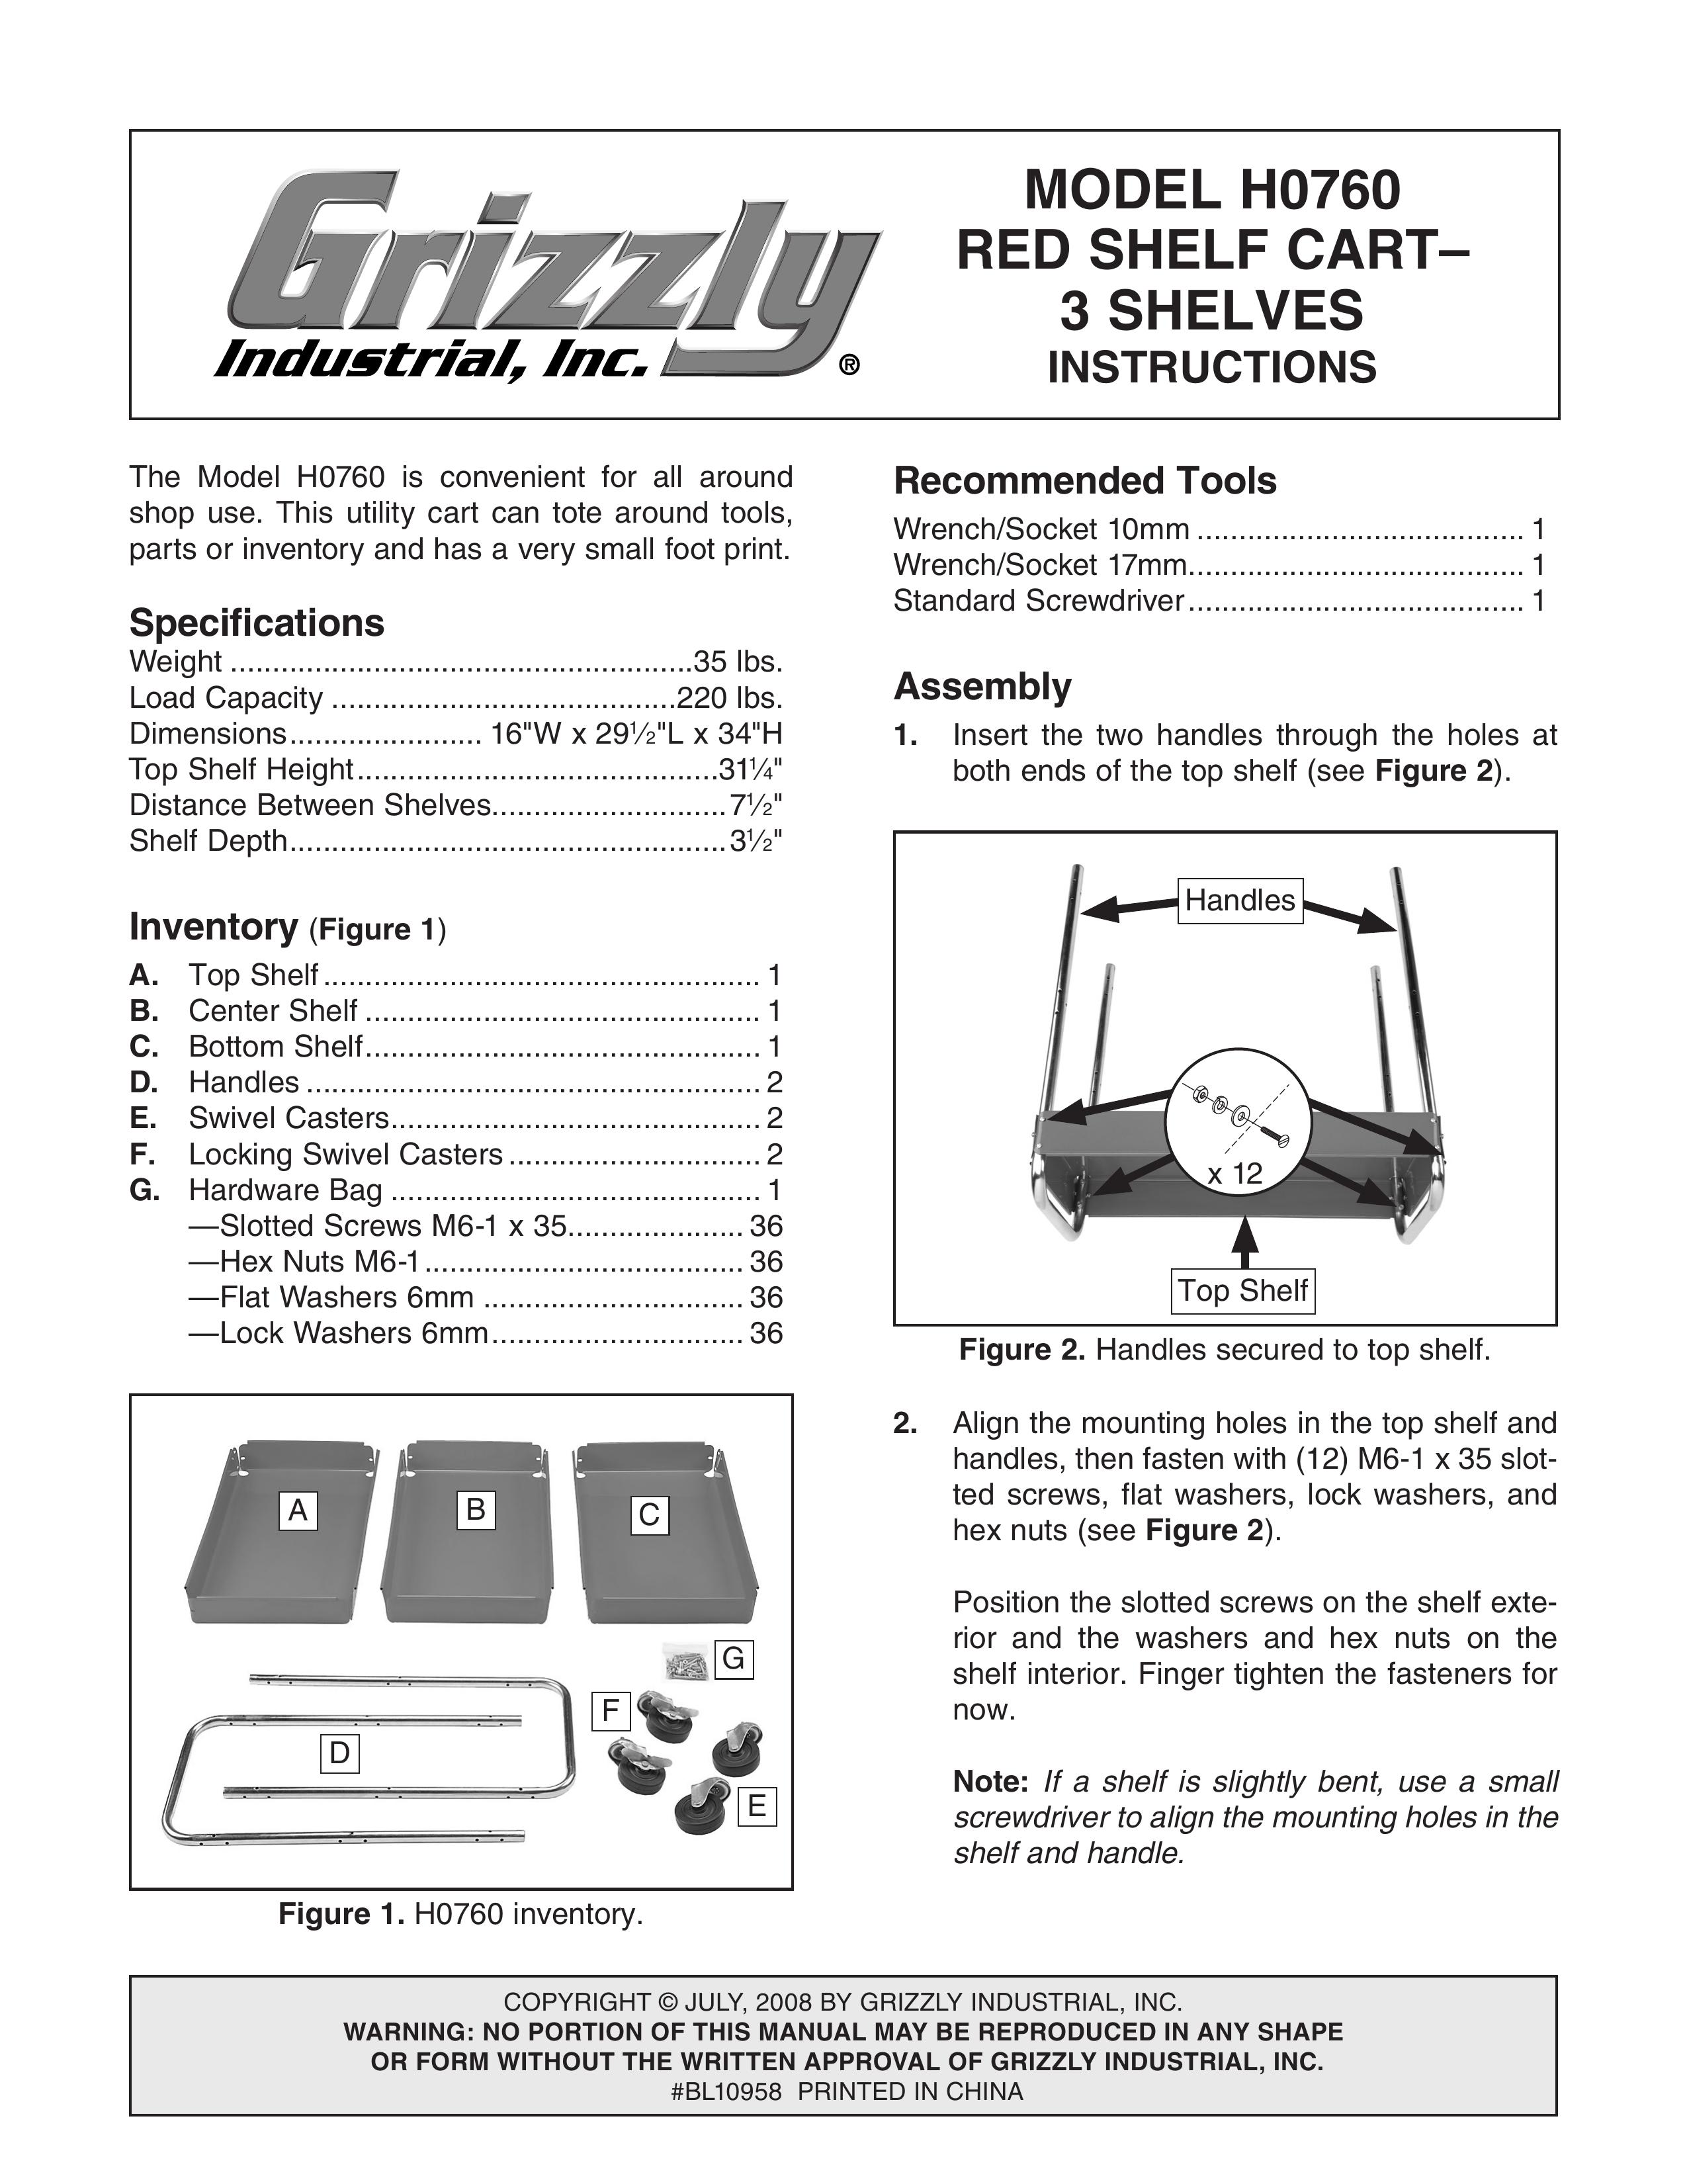 Grizzly H0760 Outdoor Cart User Manual